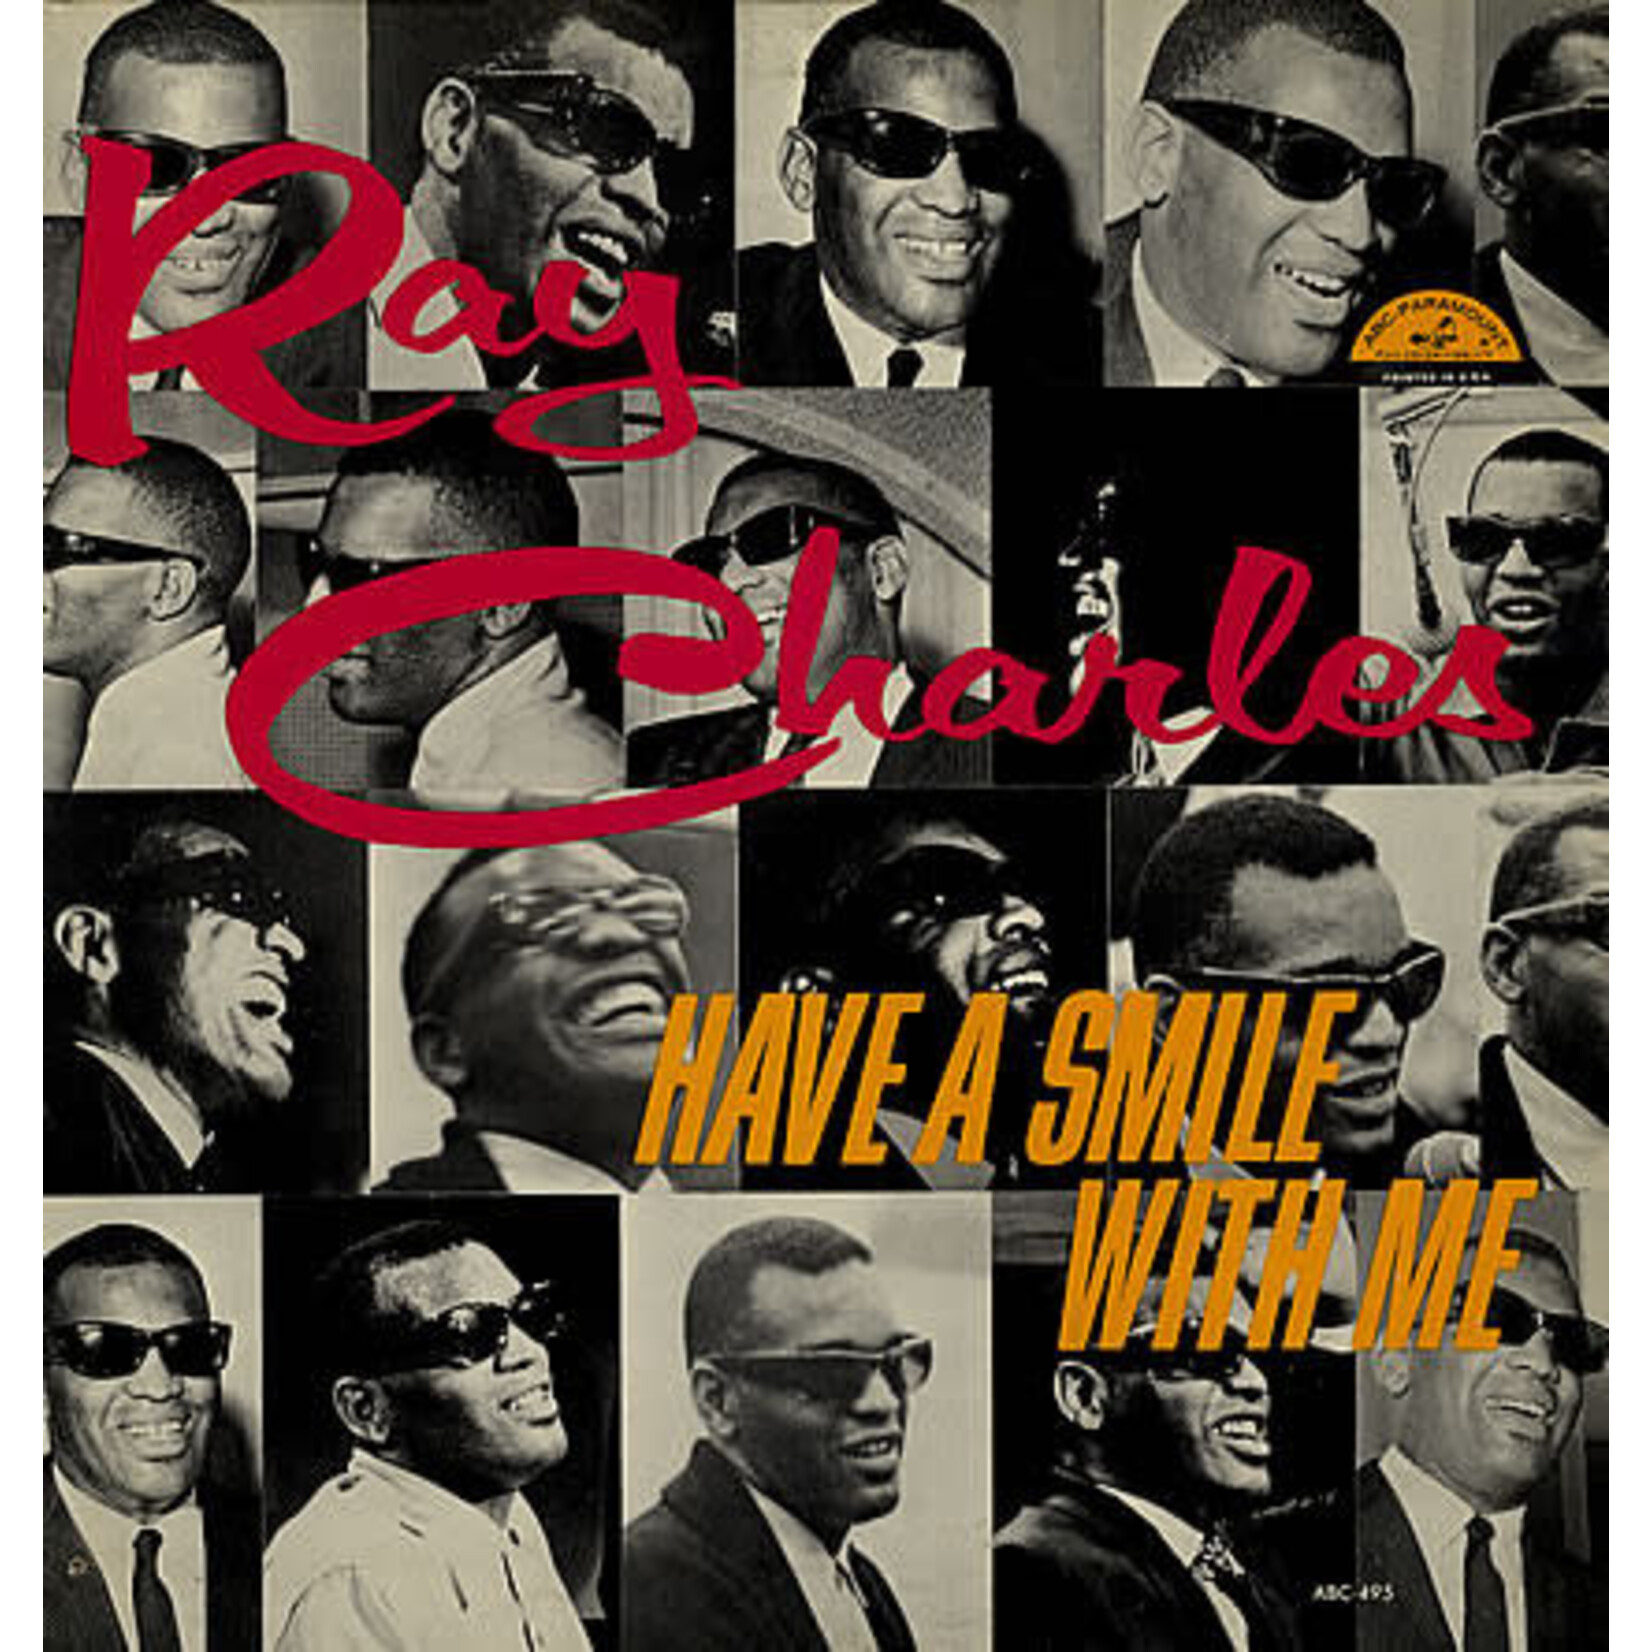 Ray Charles Ray Charles – Have A Smile With Me (VG, LP, ABC-495, 1964)